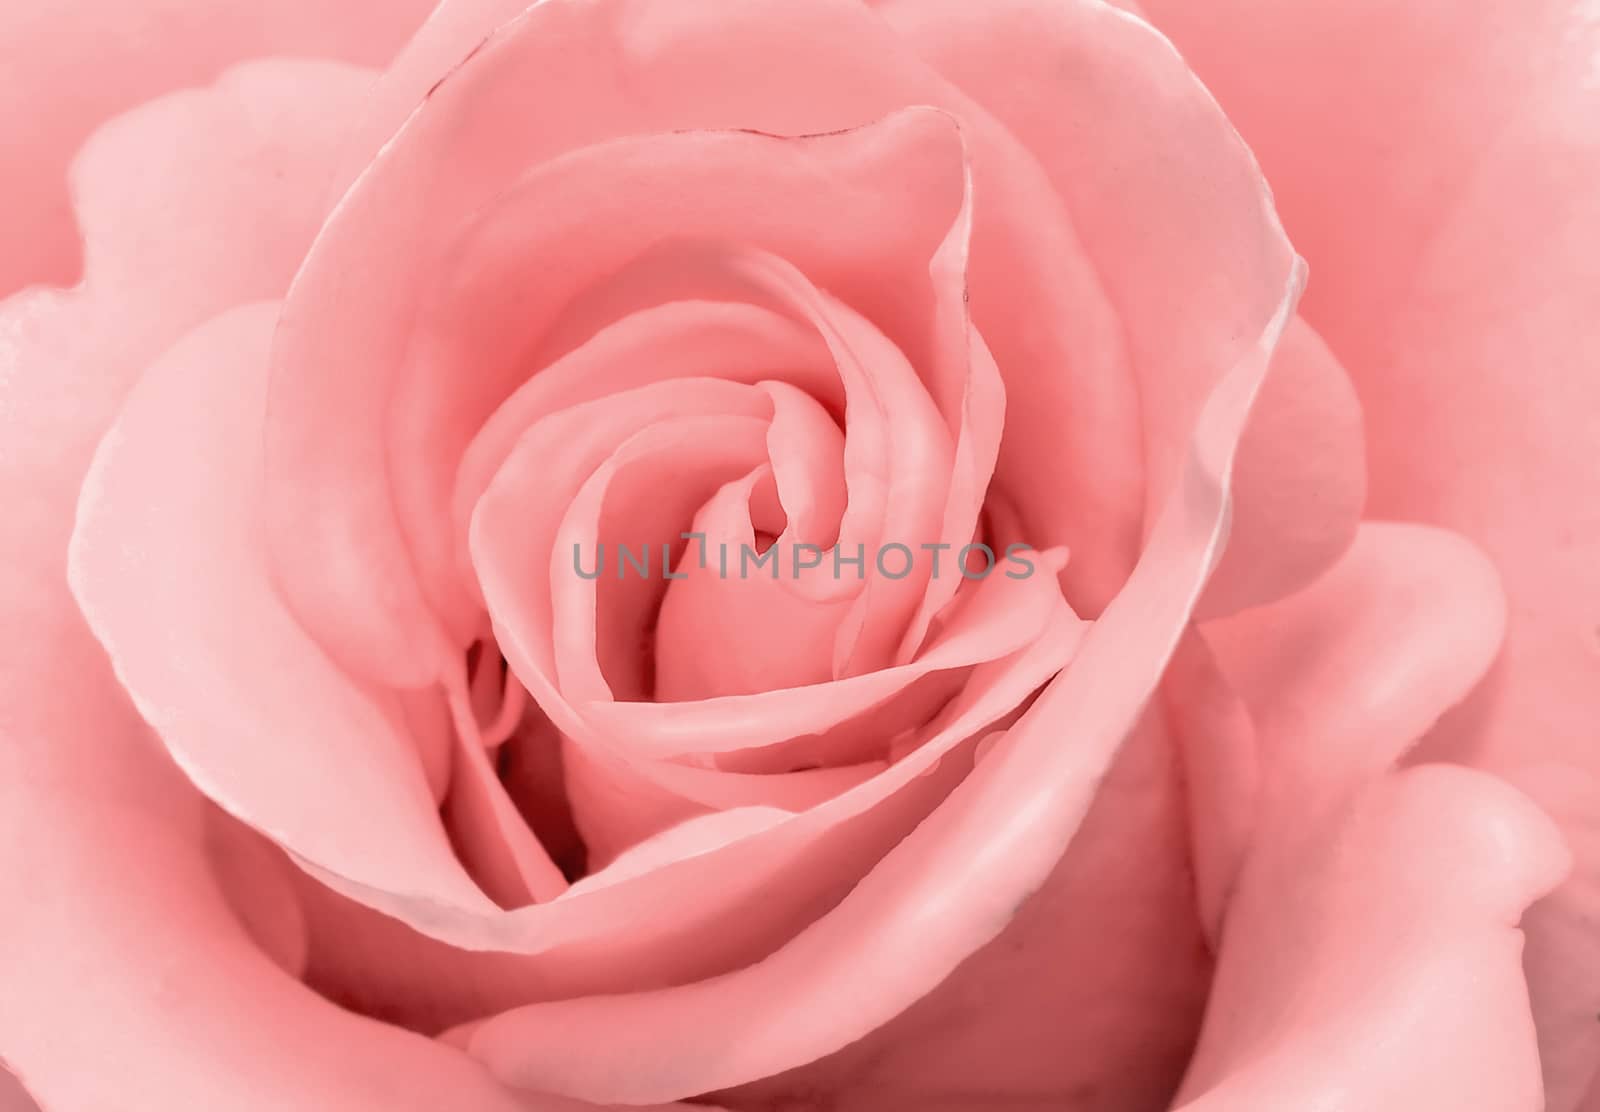 Closeup presents the core of the flower and the petals of beautiful roses delicate pale pink color